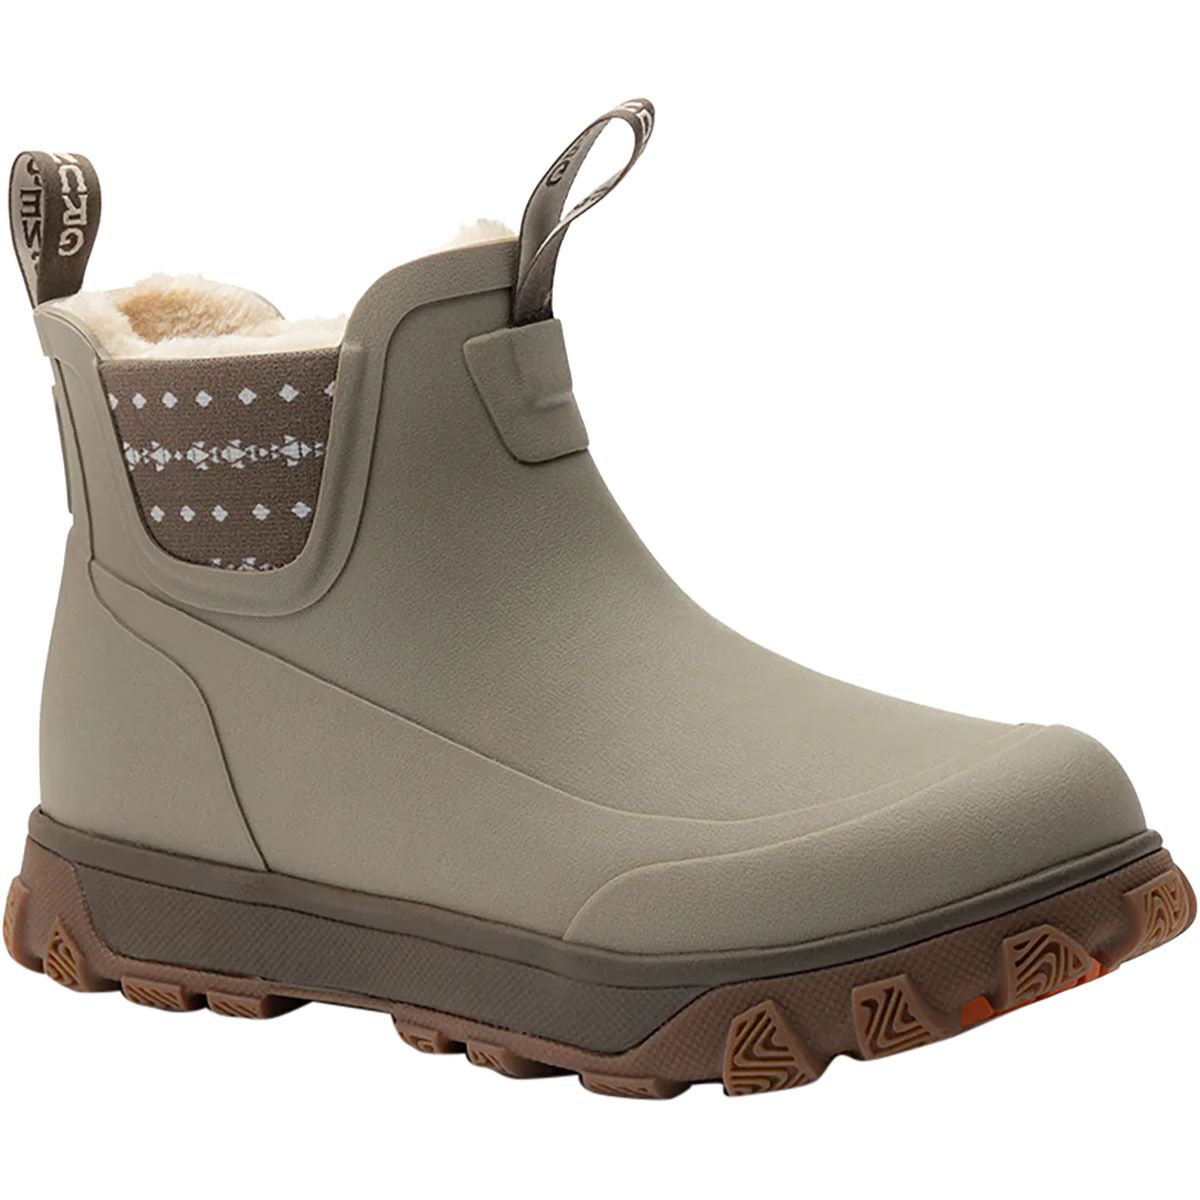 Deviation Sherpa Ankle Boot - Women